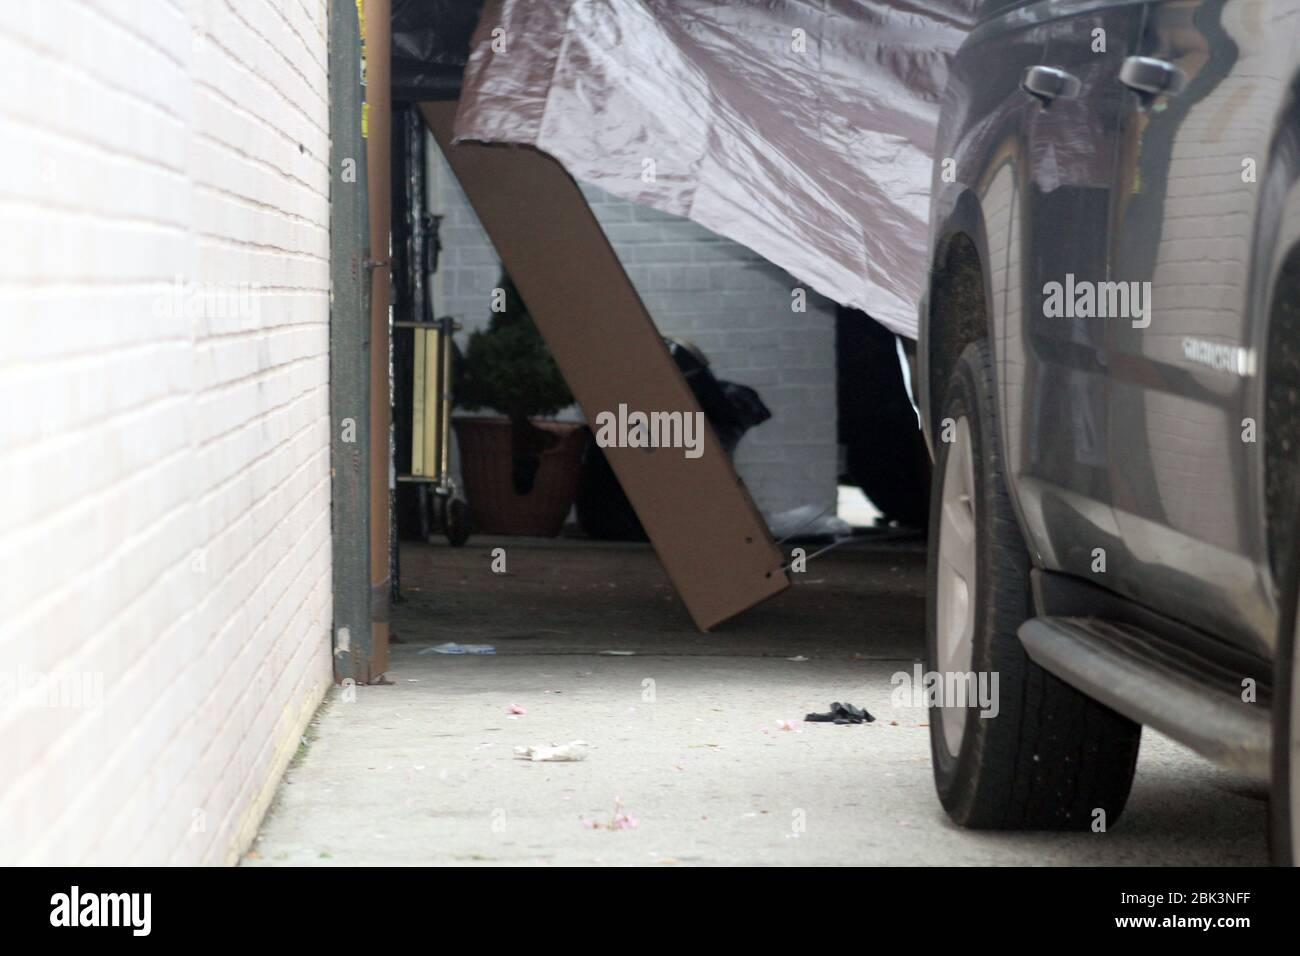 New York, New York, USA. 30th Apr, 2020. A cardboard coffin has been placed upright against a wall near a hearse in the Andrew T. Cleckley Funeral Home in Brooklyn where bodies not properly cared are removed. 60 corpses were stored in 4 non-refrigerated trucks lining the street along stores. Neighbors reported a foul smell and fluids dripping from the trucks. Some remains were also found lying on the facilityÃ¢â‚¬â„¢s floor. In New York City alone, there have been almost 13,000 COVID-19 deaths. Credit: Marie Le Ble/ZUMA Wire/Alamy Live News Stock Photo